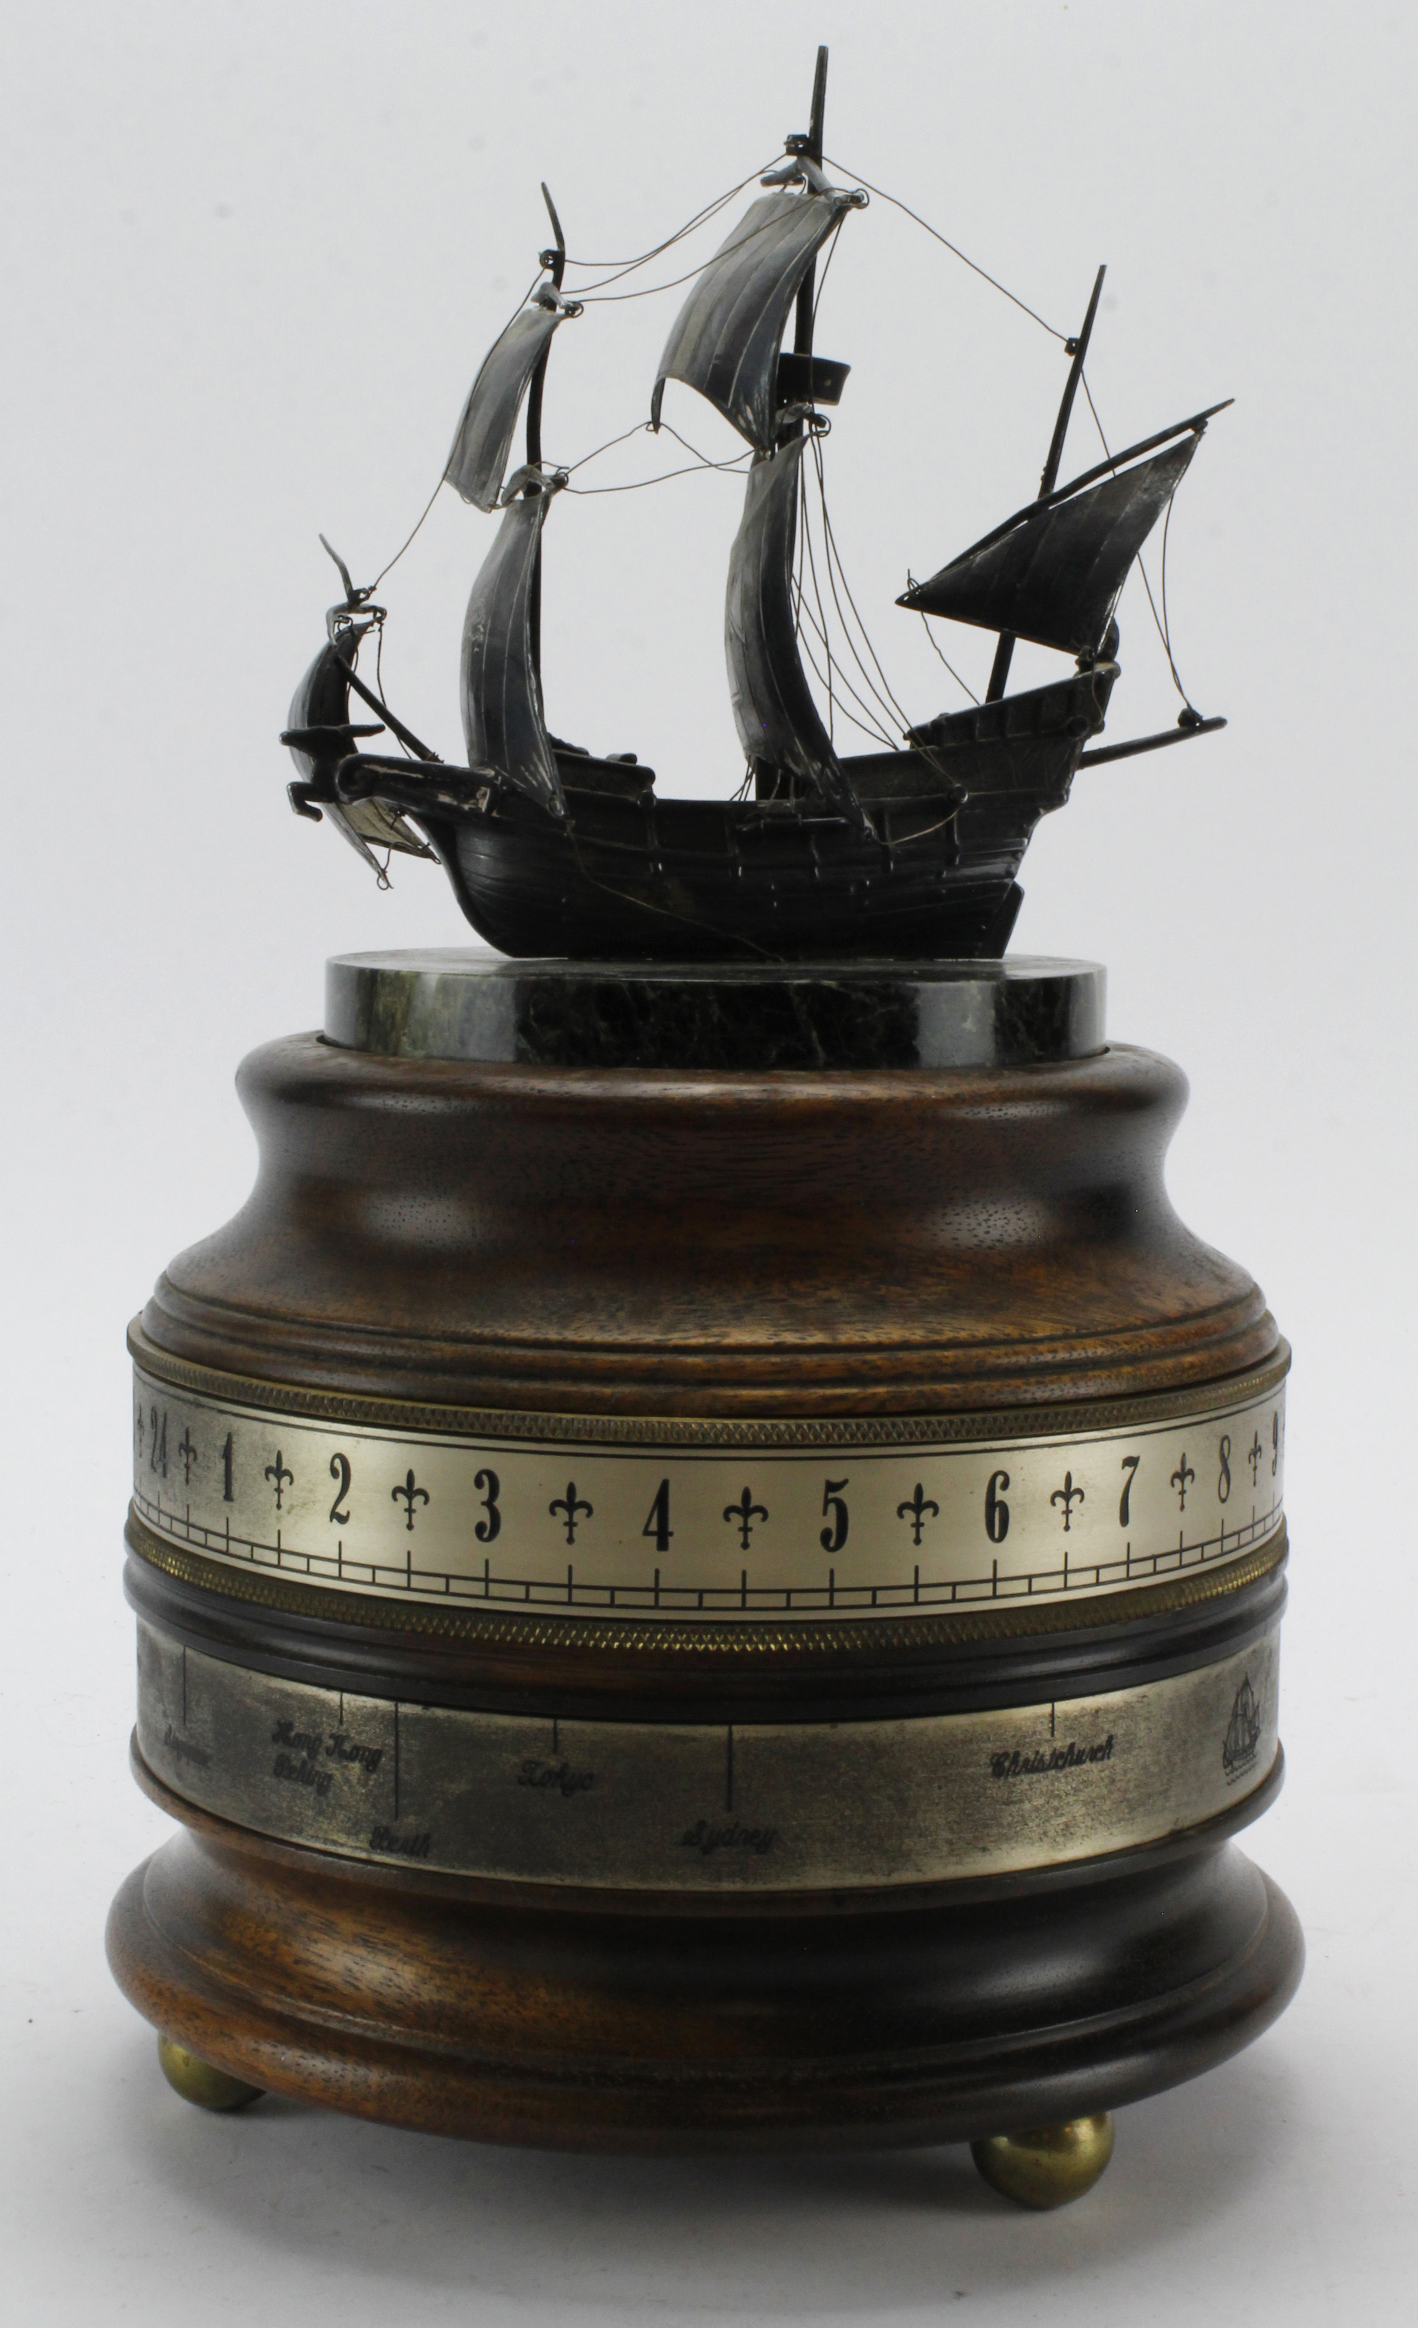 Mariners World clock, by St. James's House Company and Charles Frodsham & Company Ltd, limited